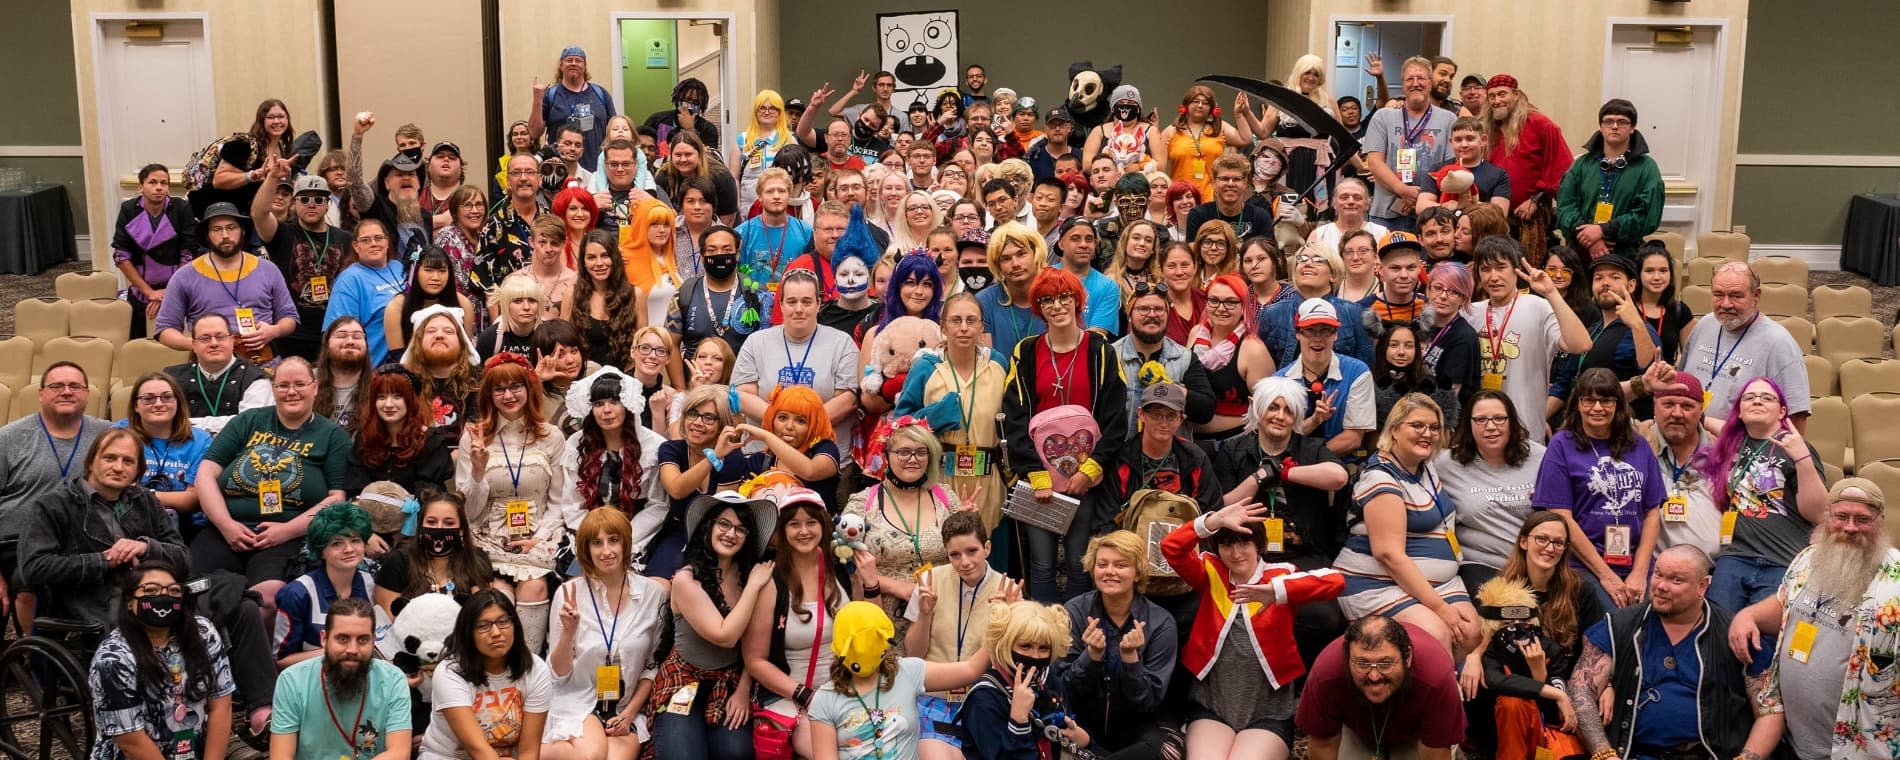 List of Upcoming Anime Conventions 2021-2022 — Jotaku Network